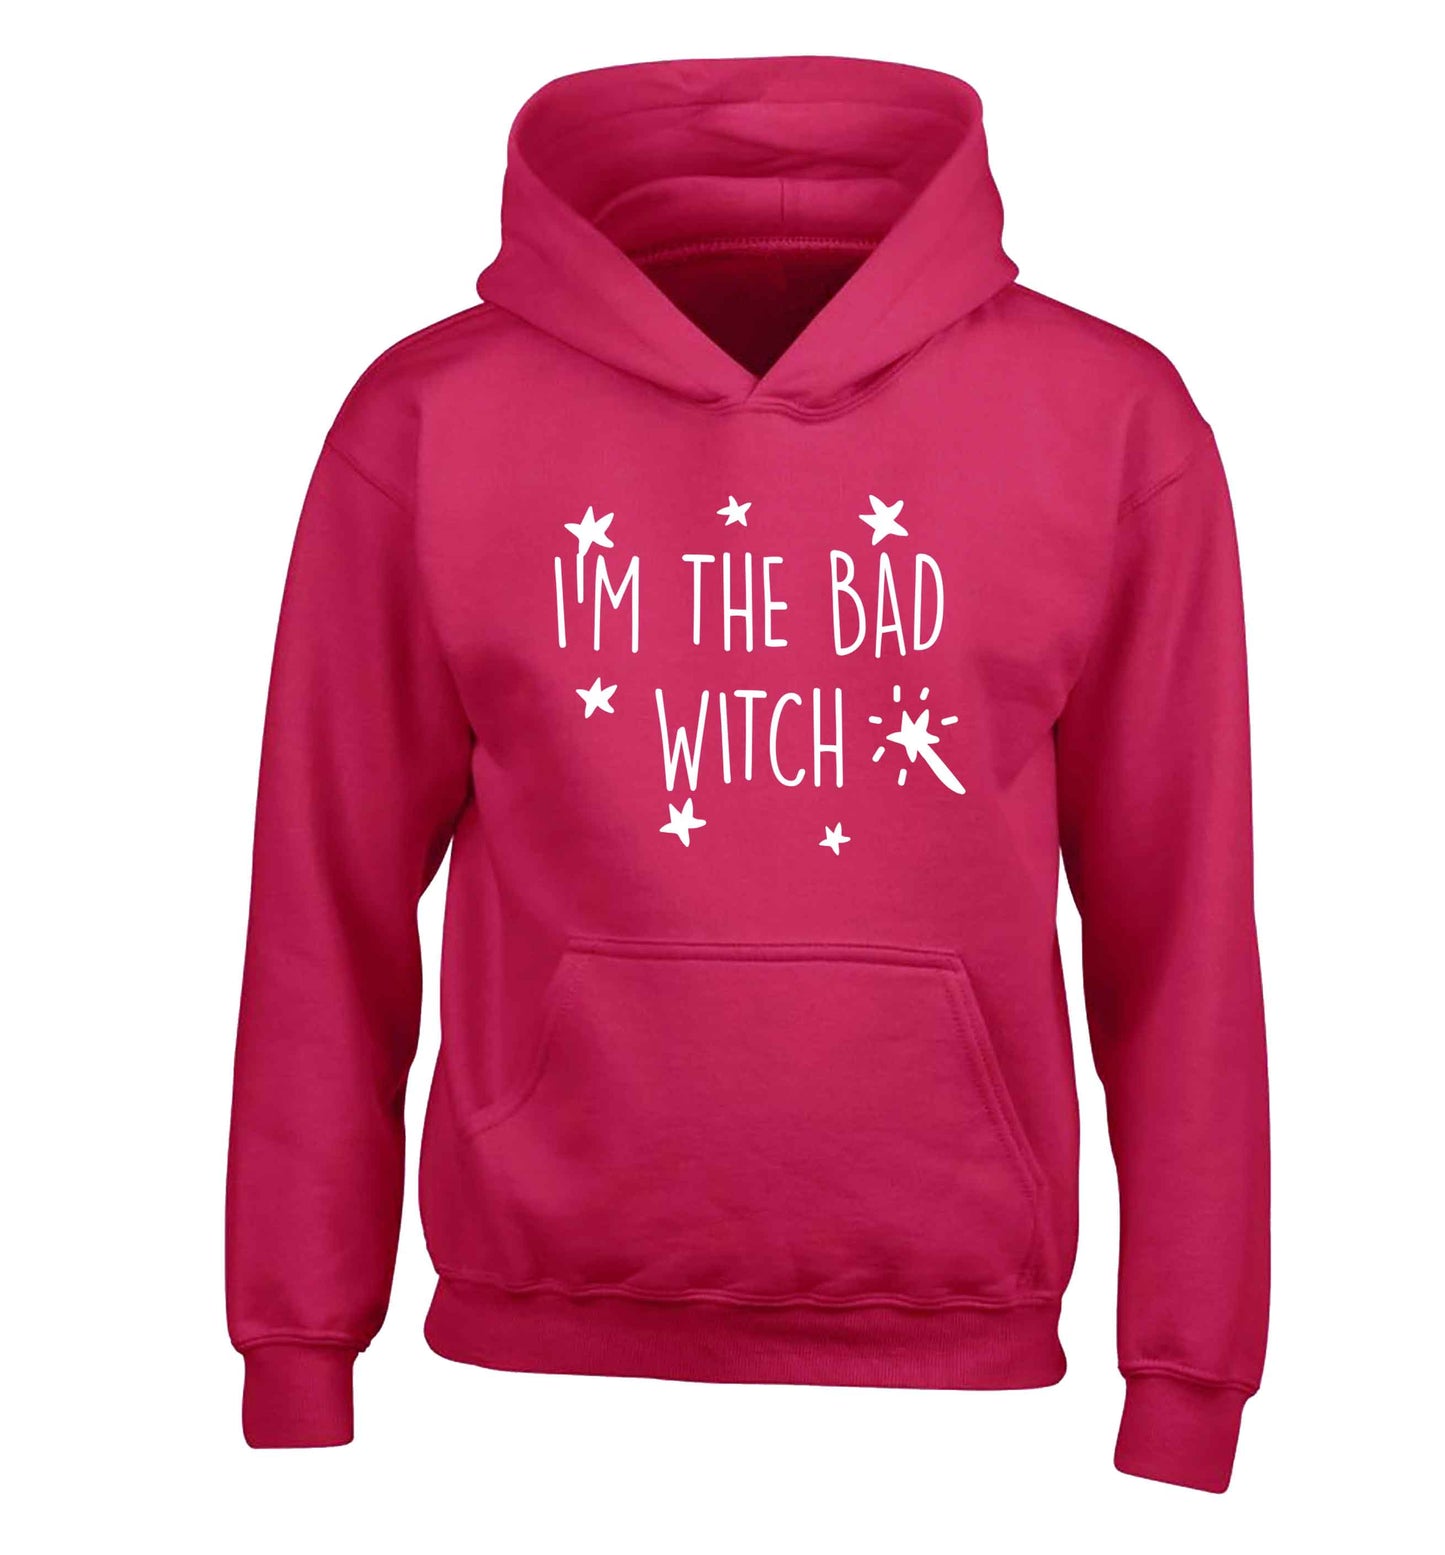 Bad witch children's pink hoodie 12-13 Years